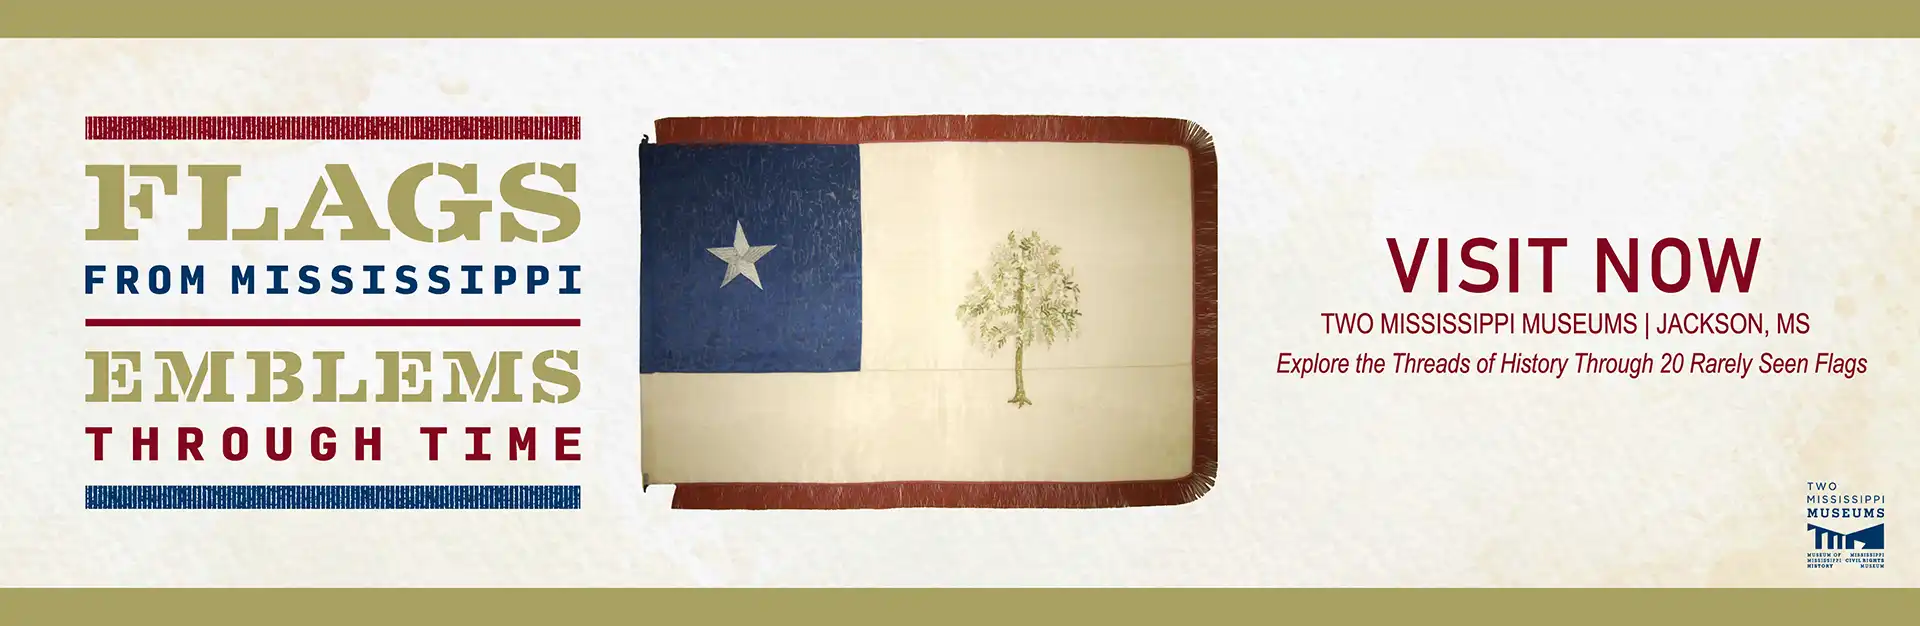 Flags from Mississippi - Emblems Through Time Visit Now